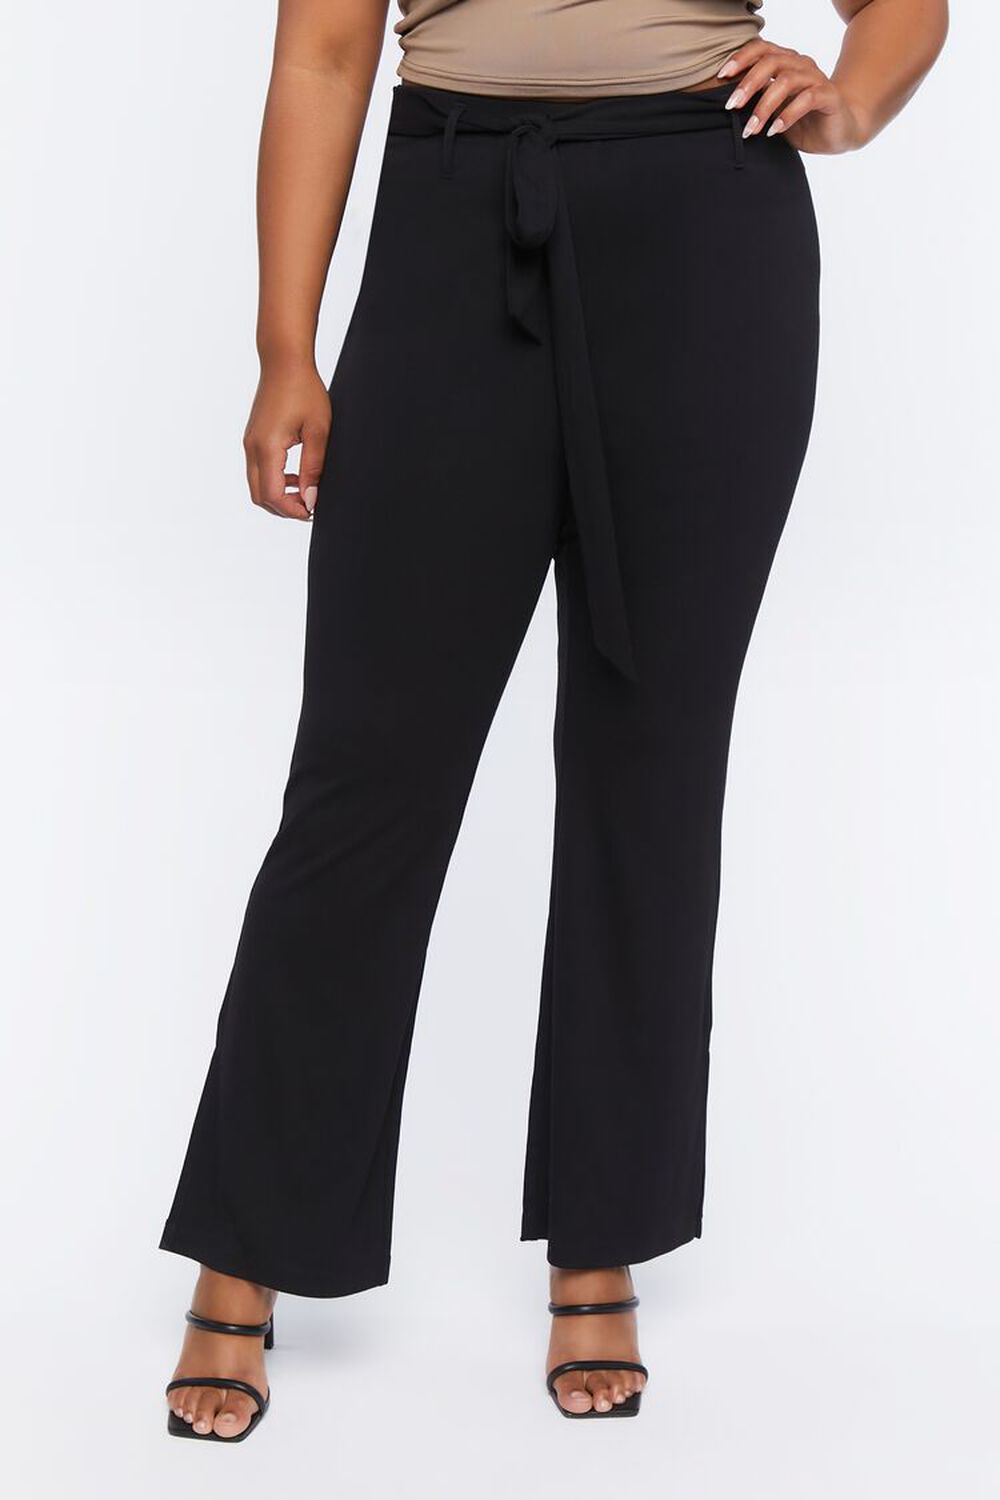 Plus Size Belted Flare Pants, image 2